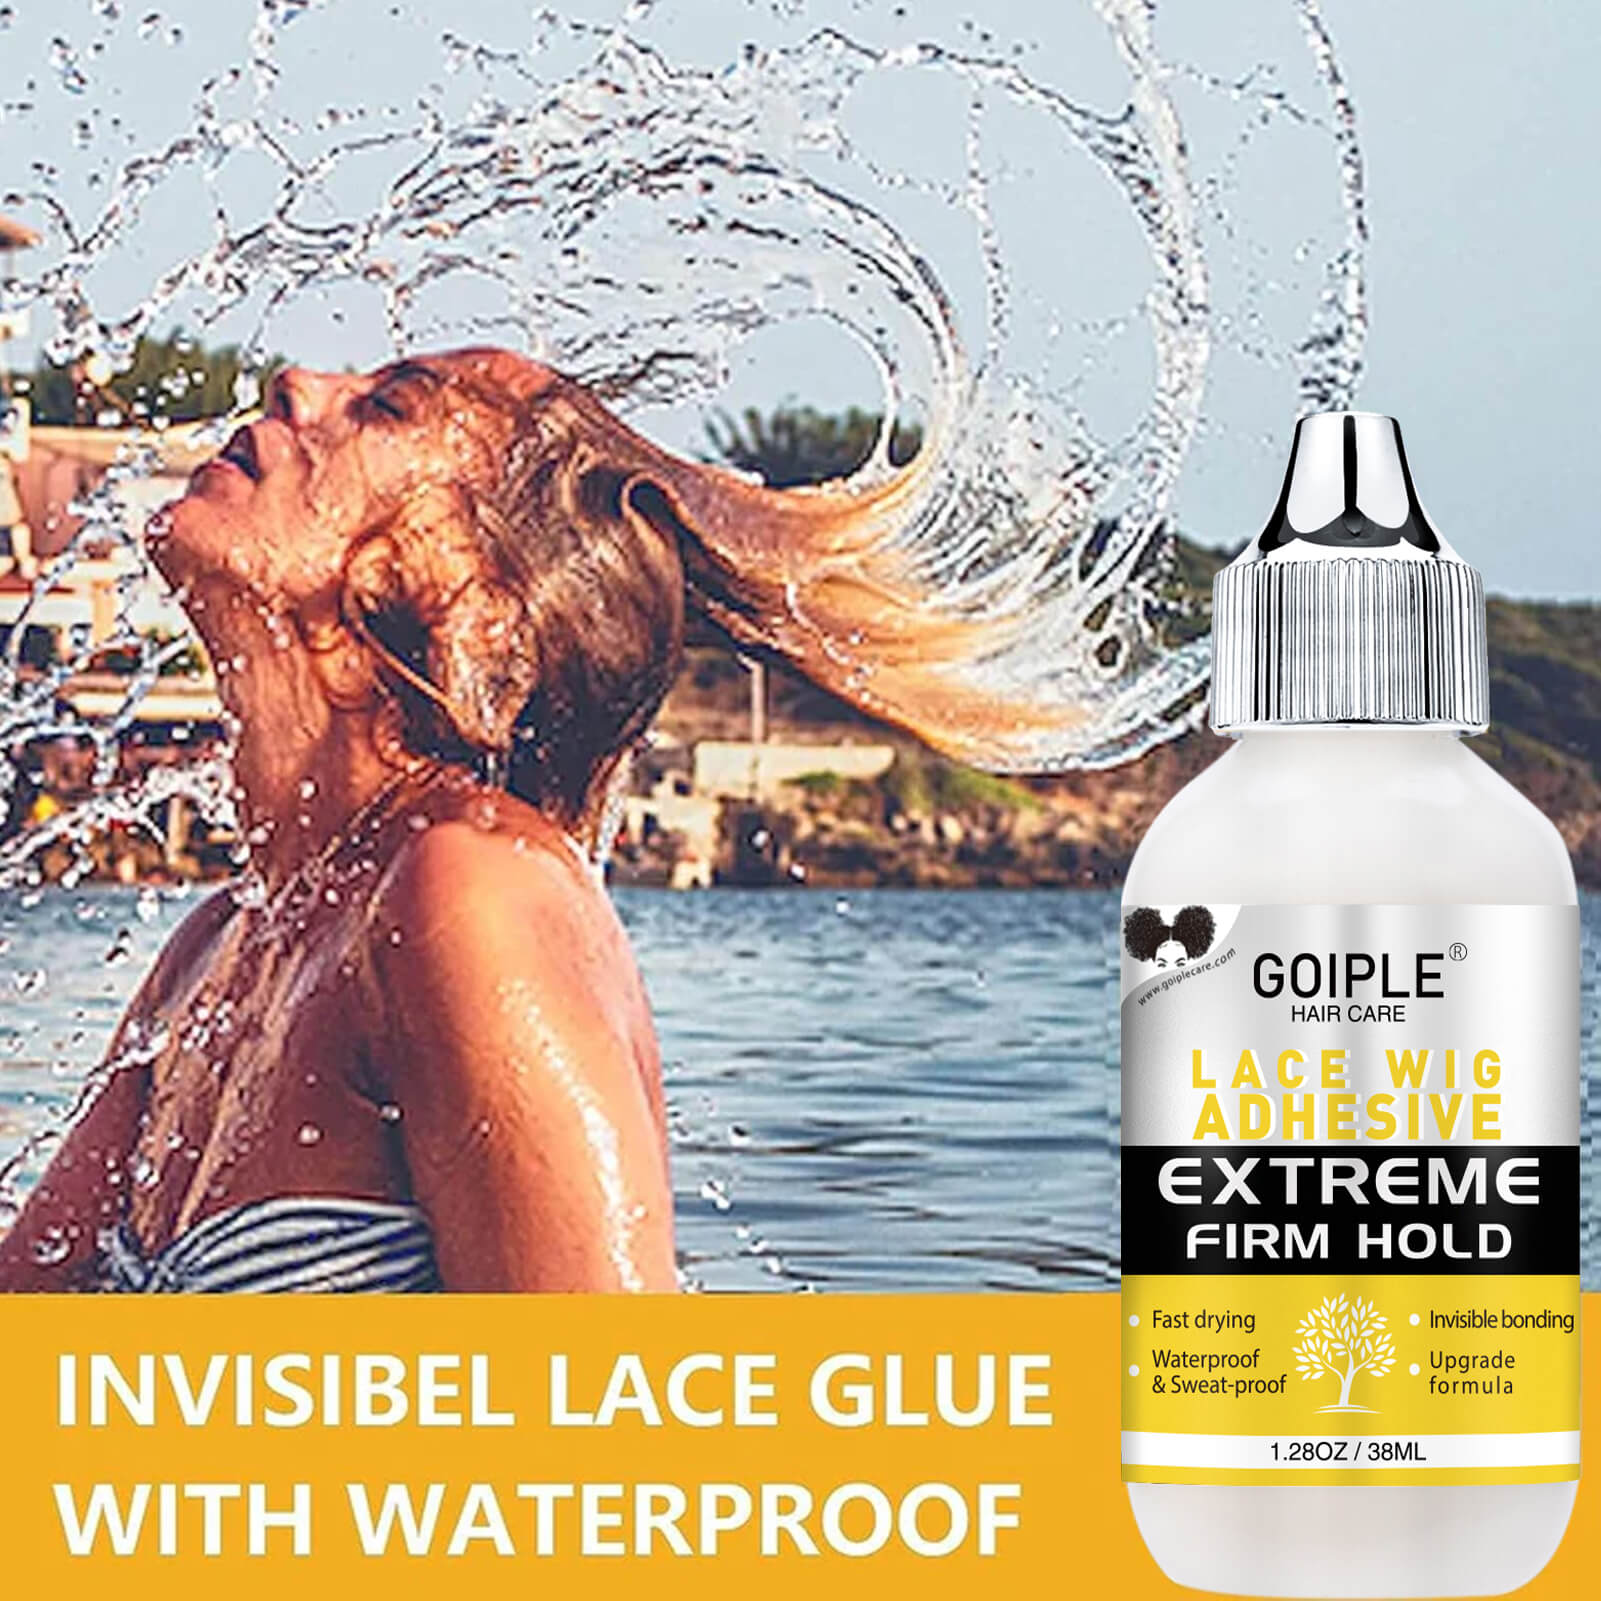 Waterproof &Strong Hold Lace Glue